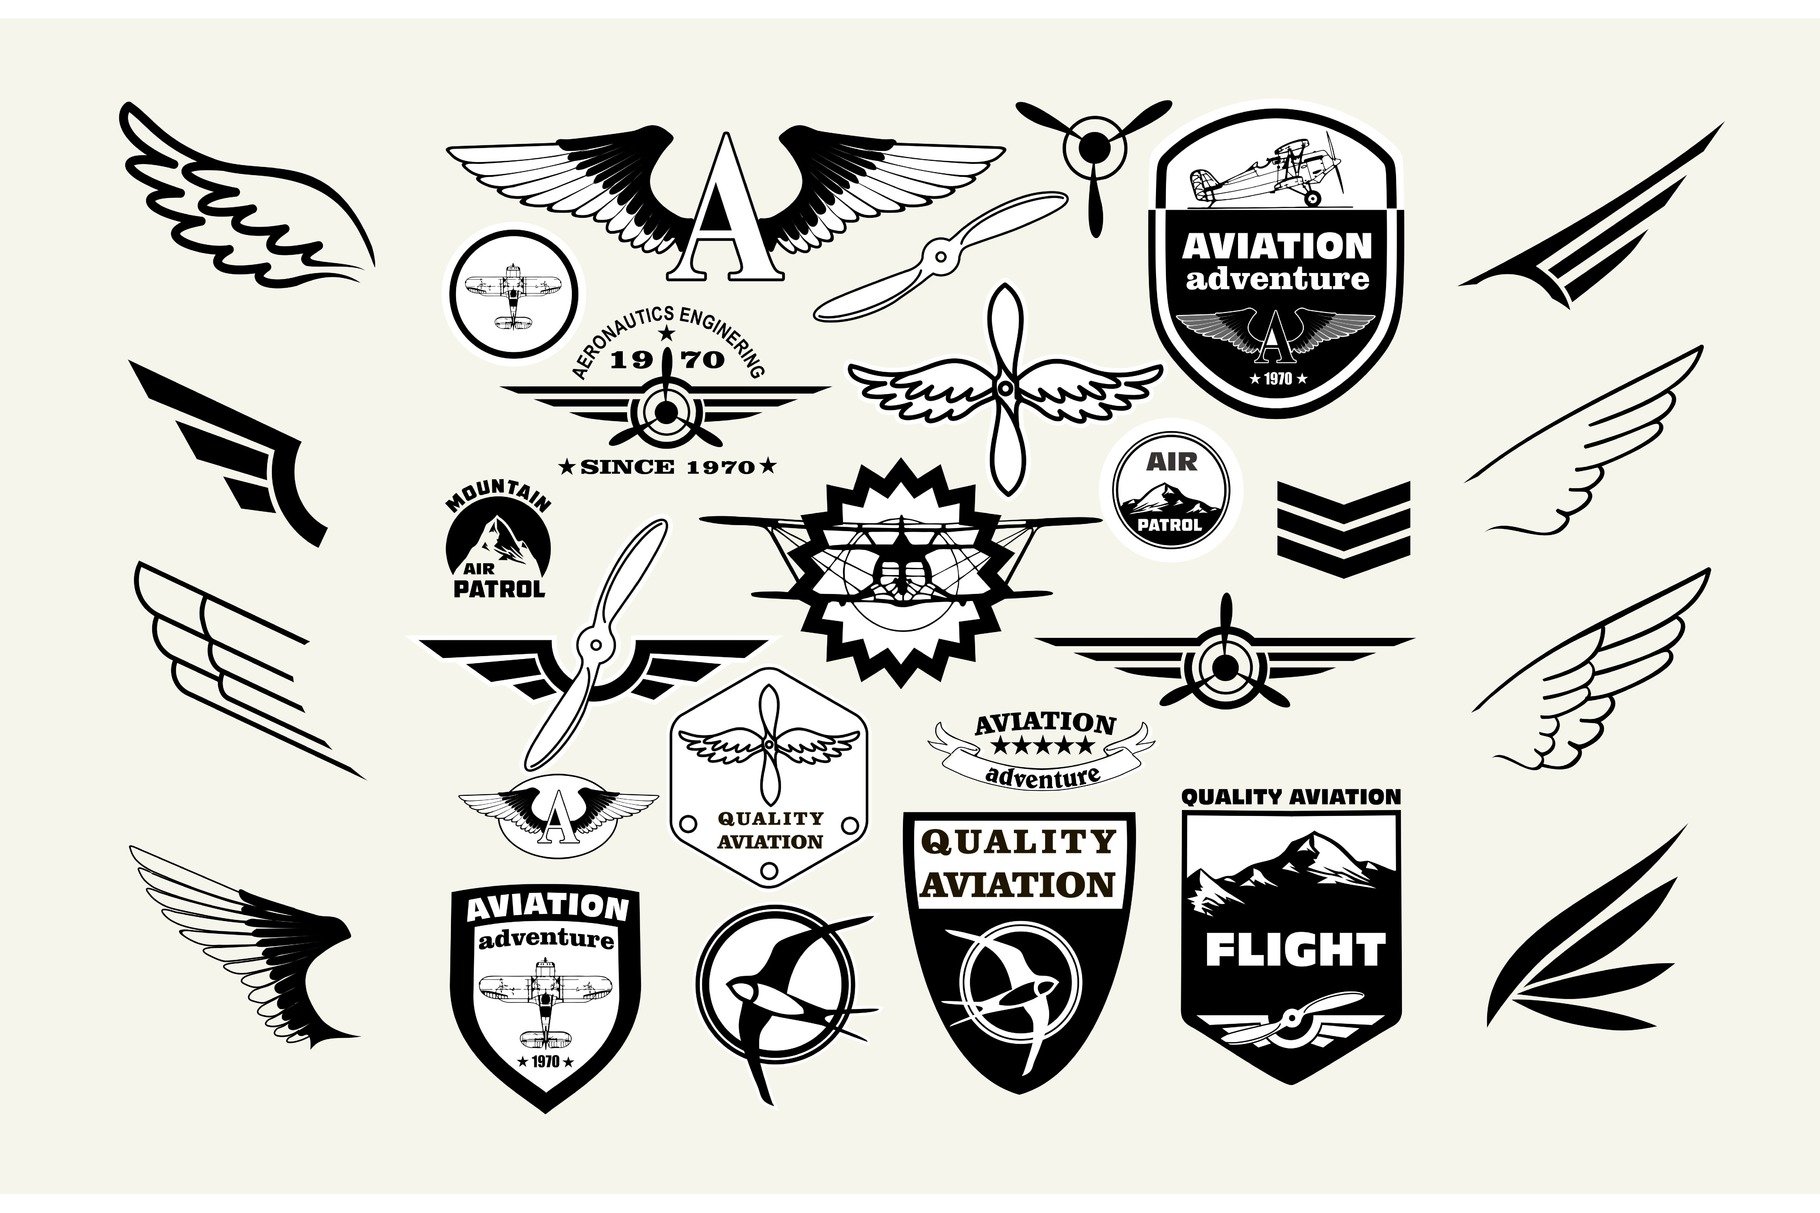 Aviation Logo and elements cover image.